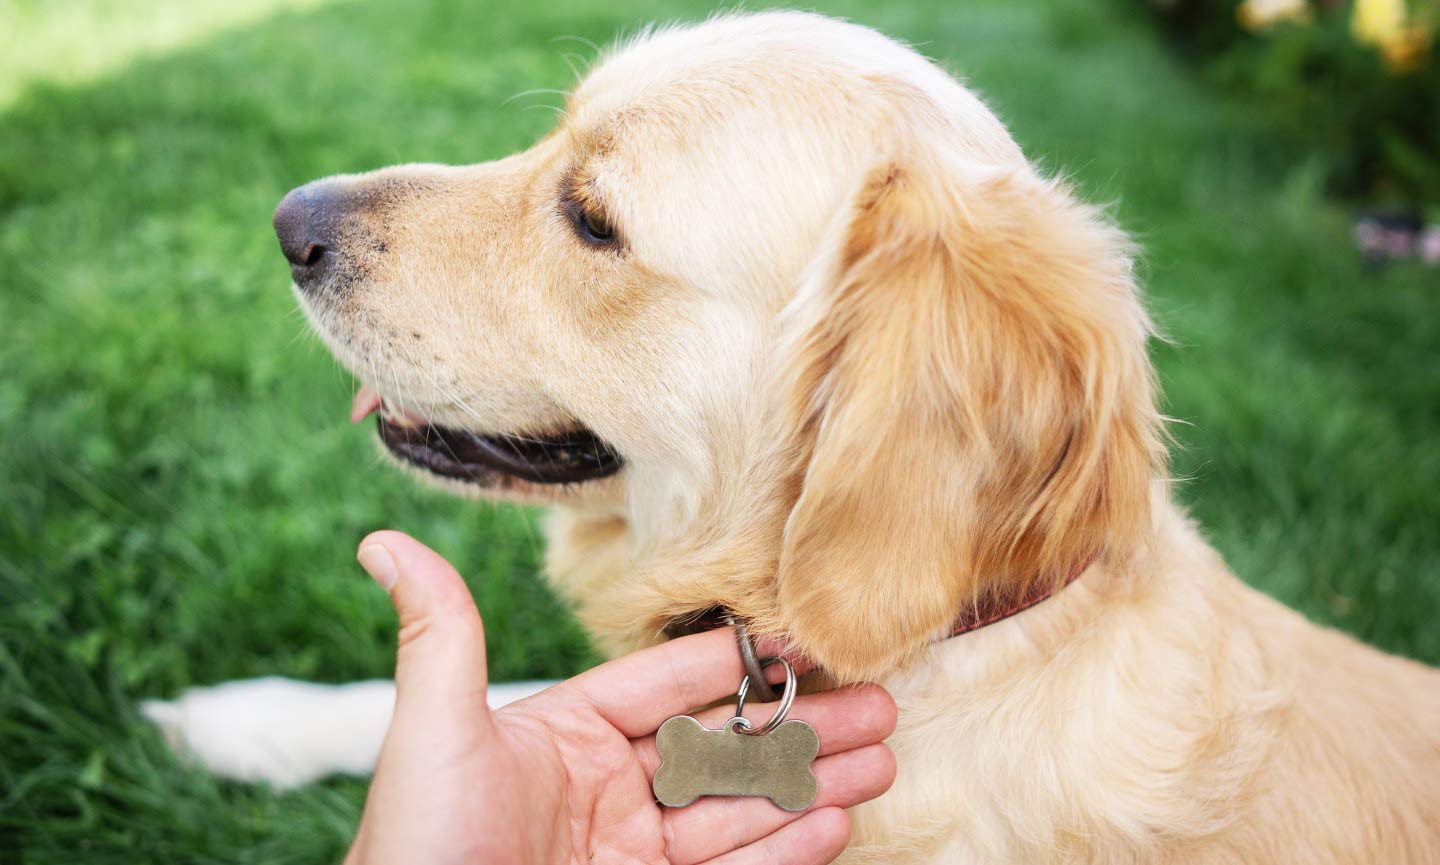 Up-close photo of a dog wearing an ID tag